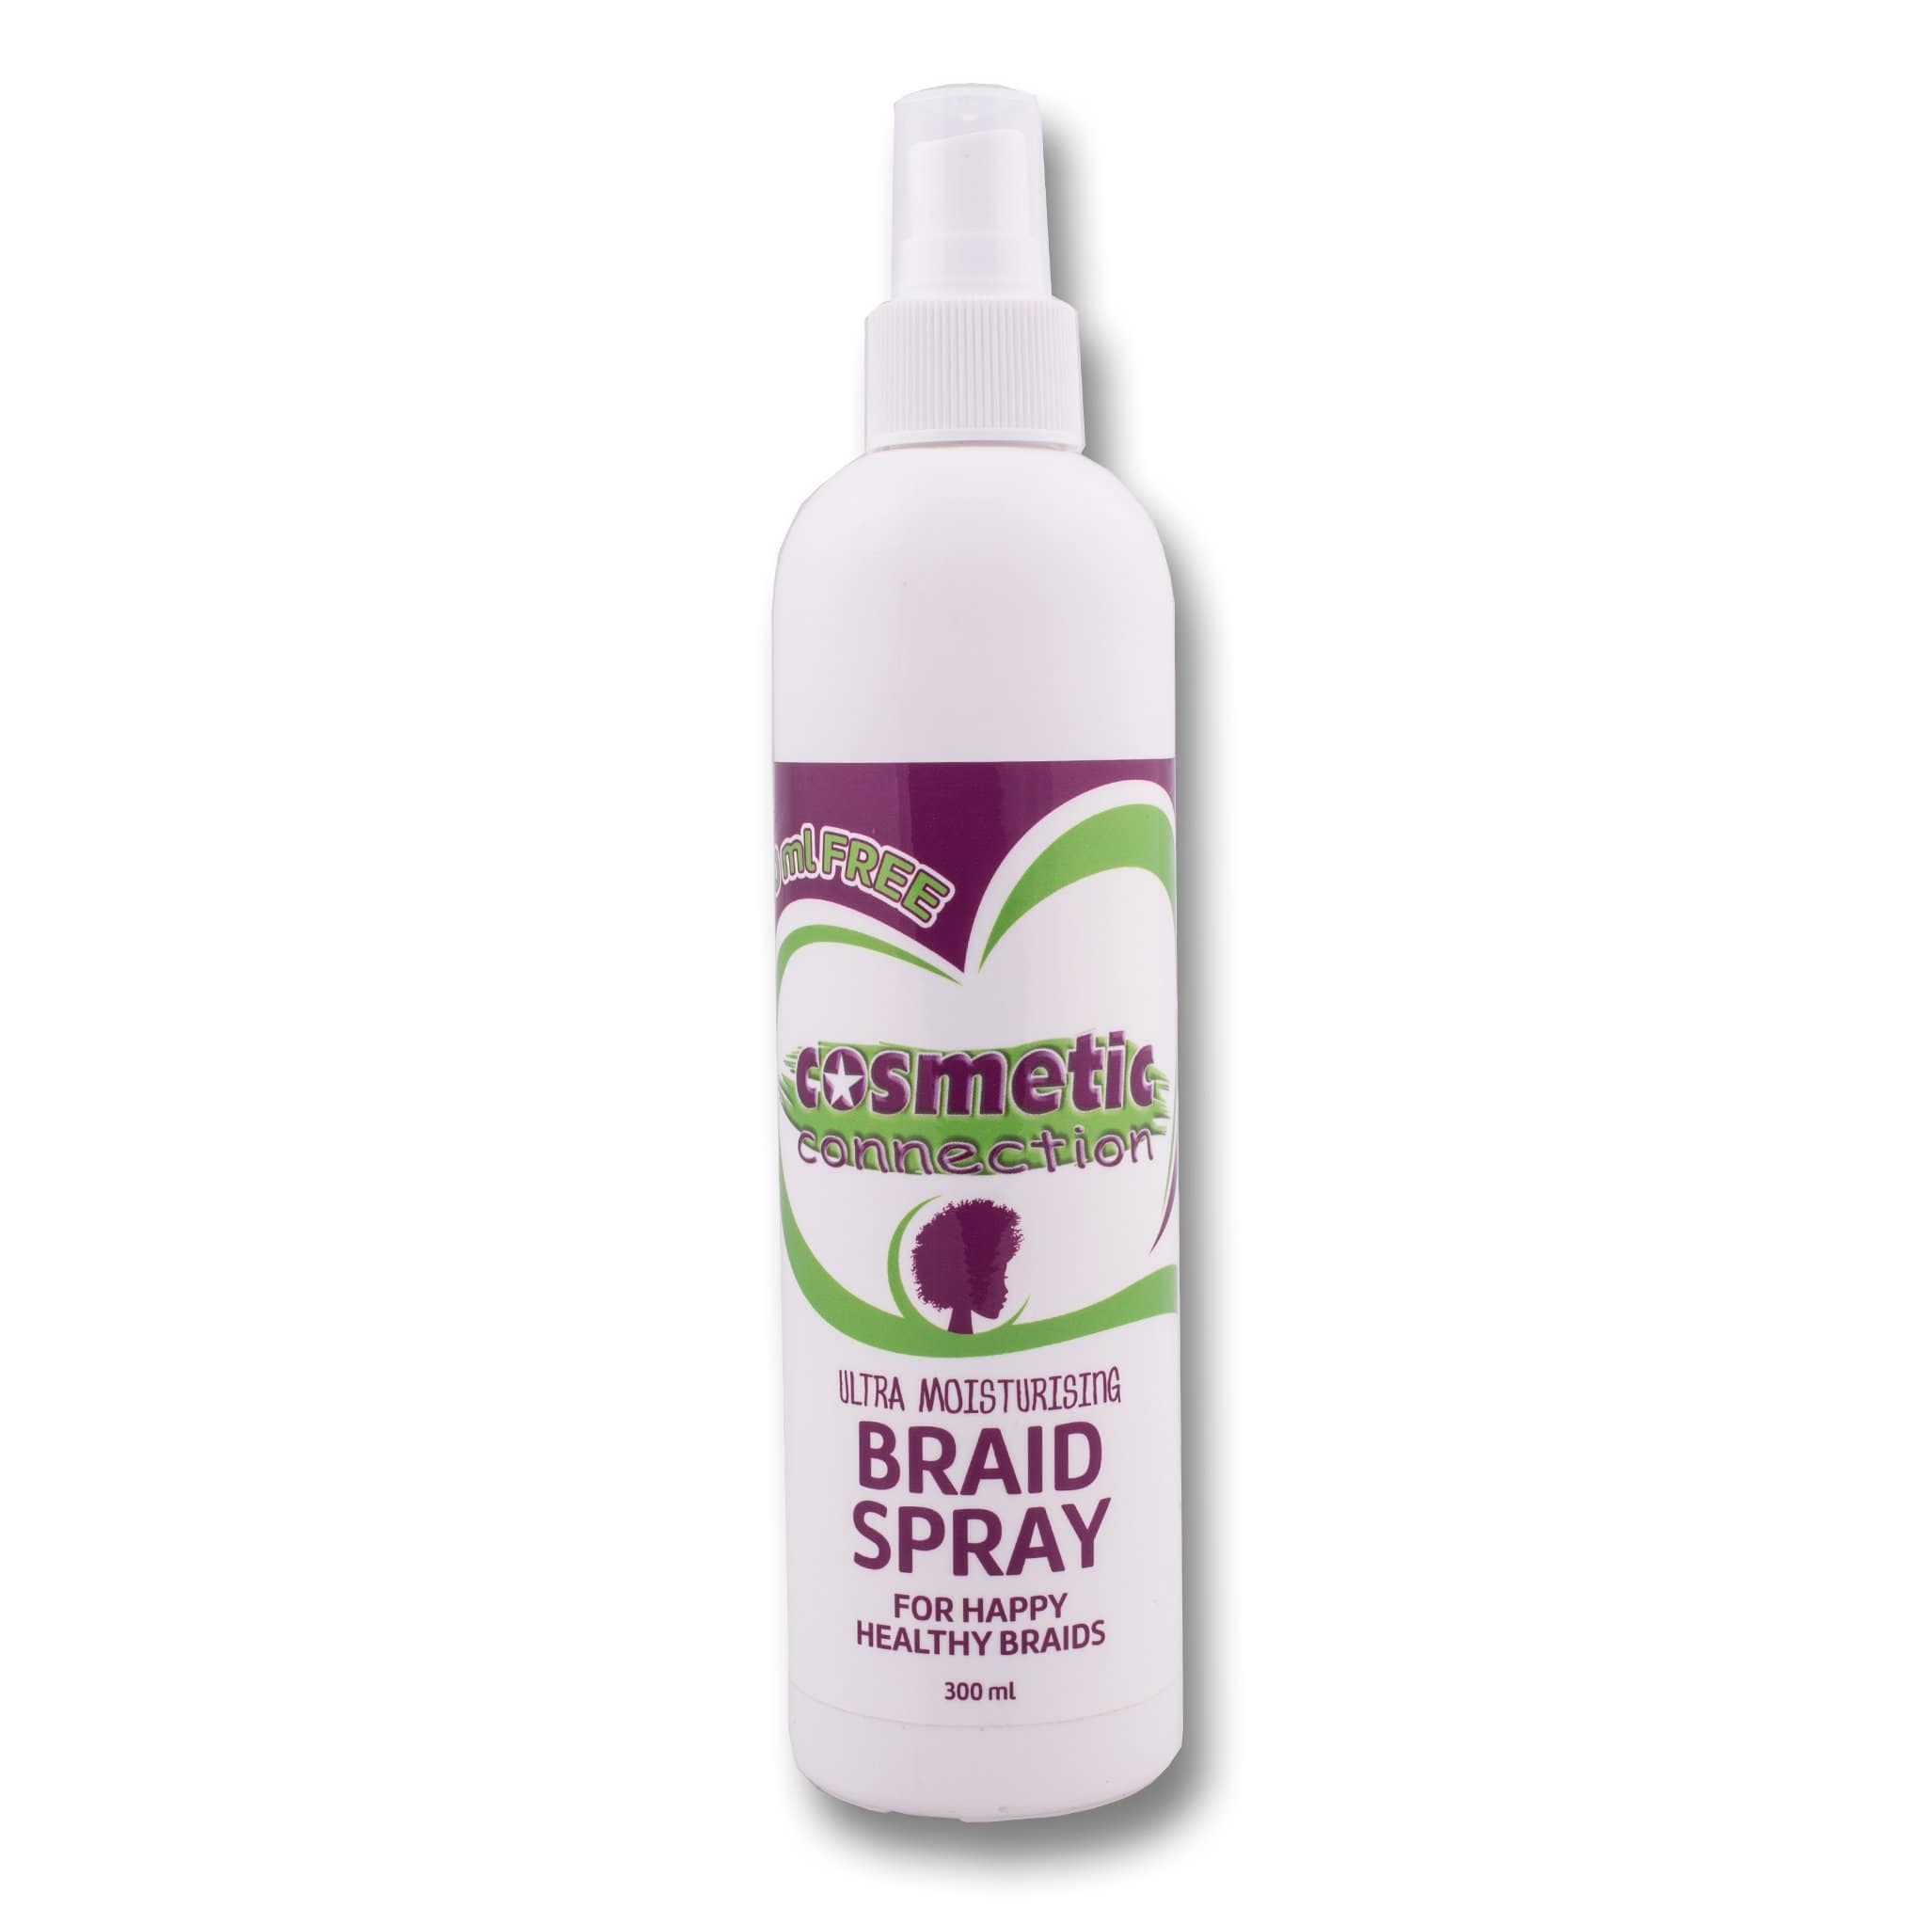 Cosmetic Connection, Braid Spray 300ml - Cosmetic Connection